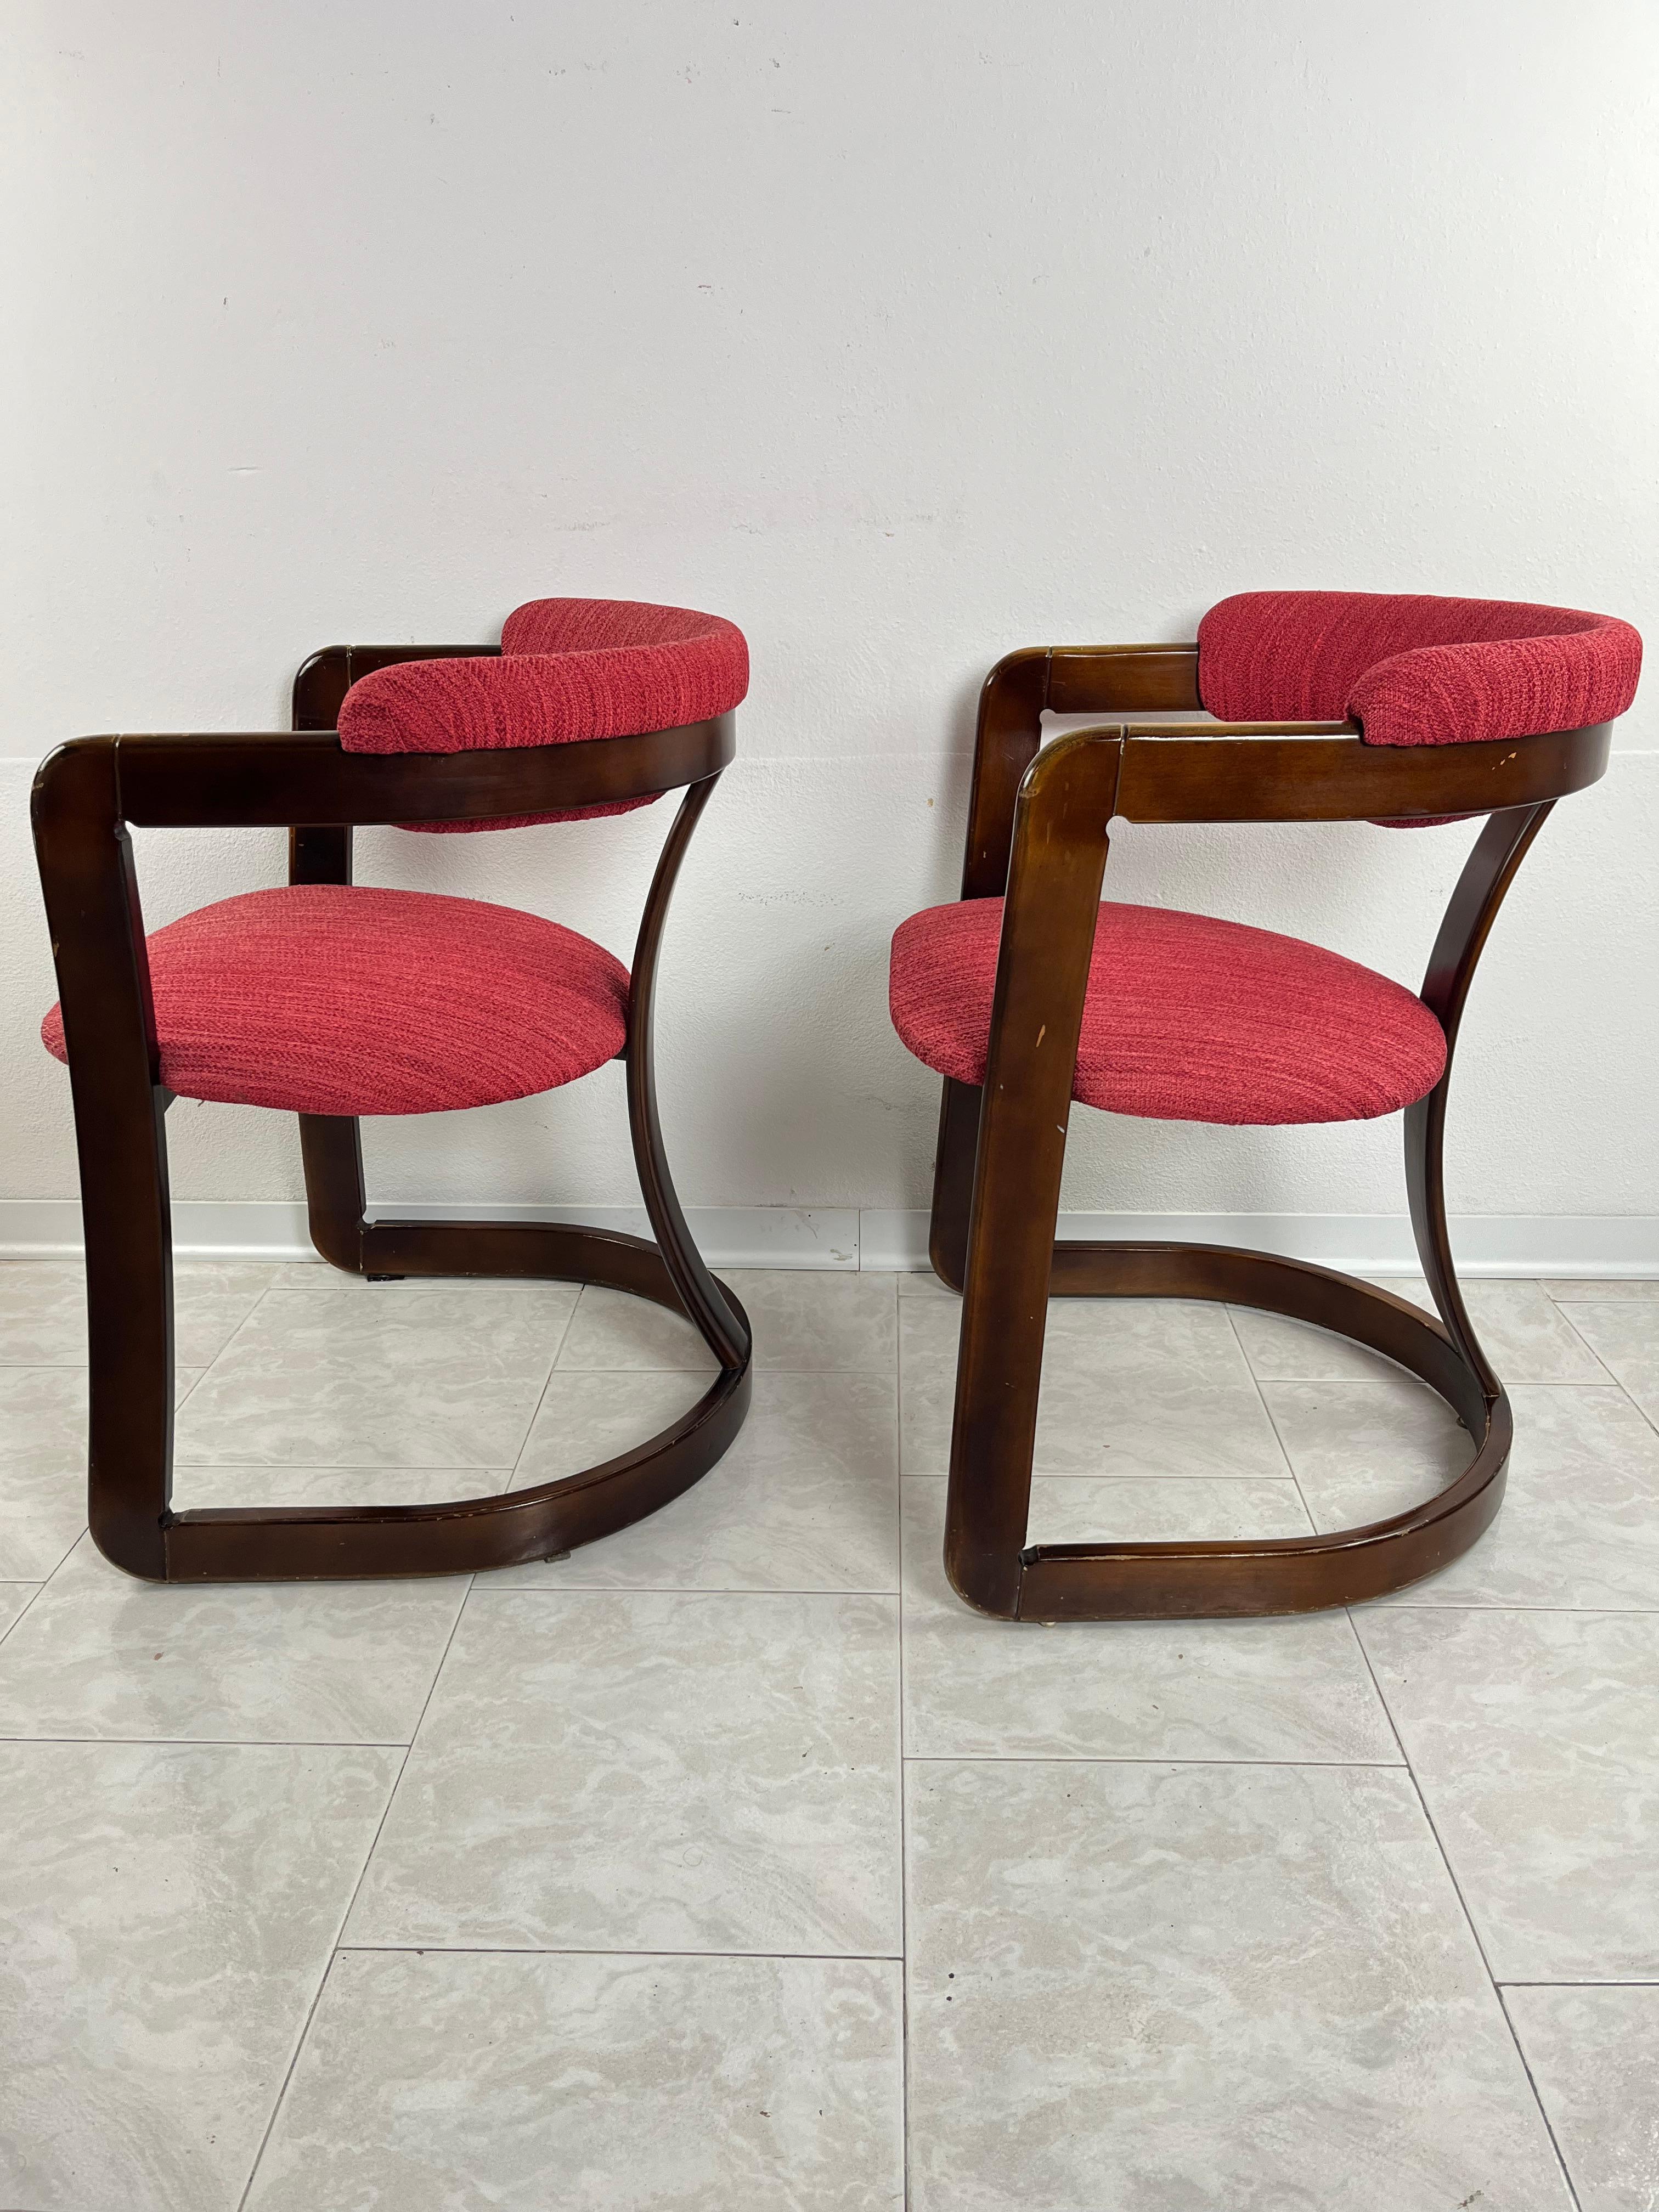 Fabric Set of 2 Mid-Century Curved Wooden Chairs Attributed to A. & P. Castiglioni For Sale